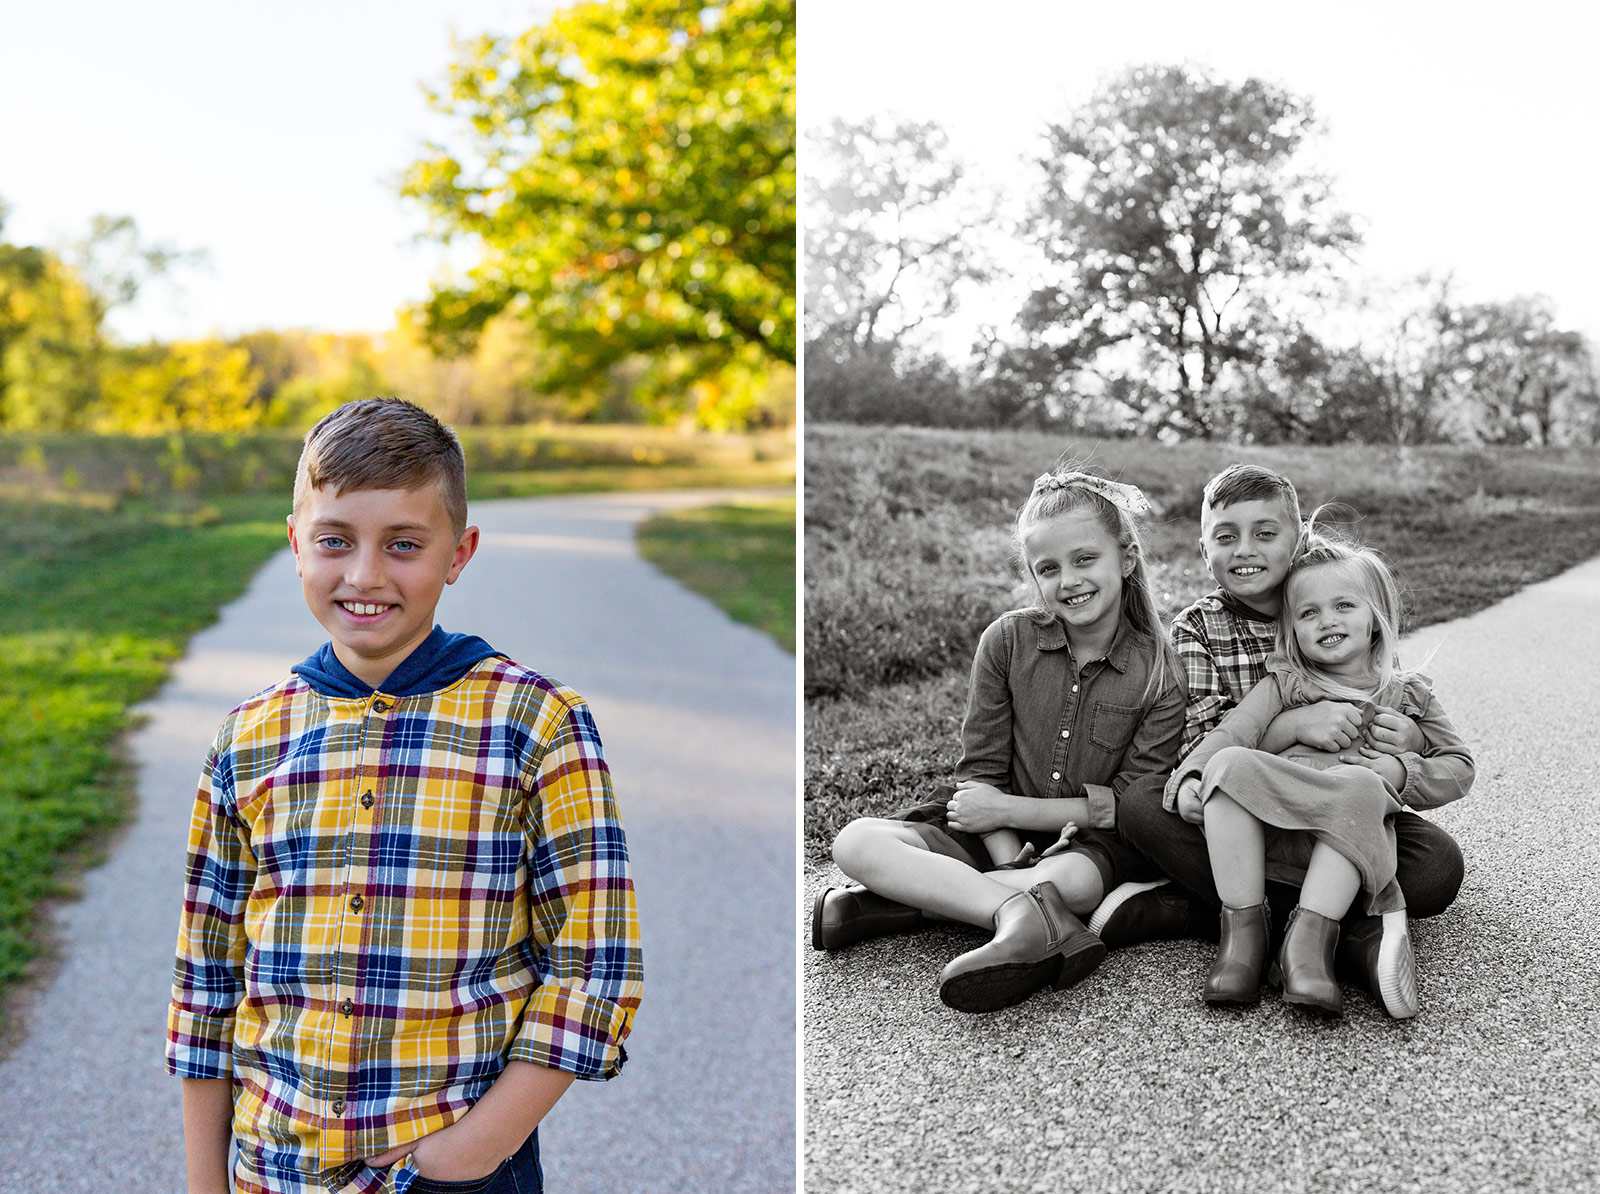 Christian poses naturally on the sidewalk, and the three siblings sit close together smiling.